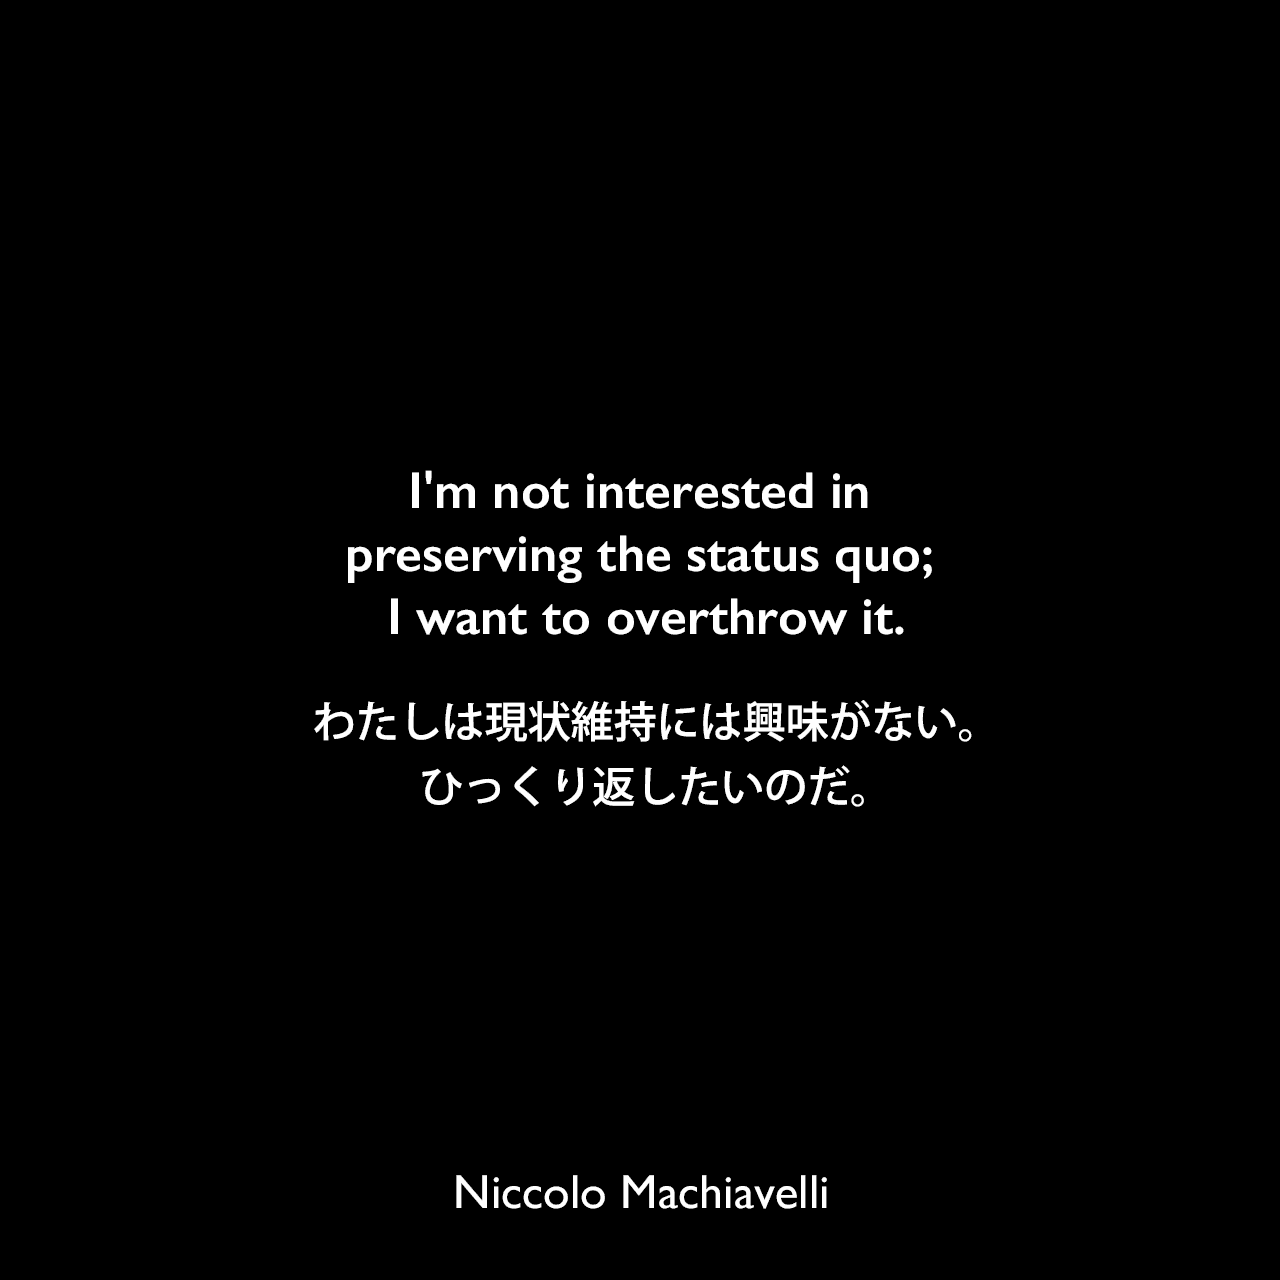 I'm not interested in preserving the status quo; I want to overthrow it.わたしは現状維持には興味がない。ひっくり返したいのだ。Niccolo Machiavelli